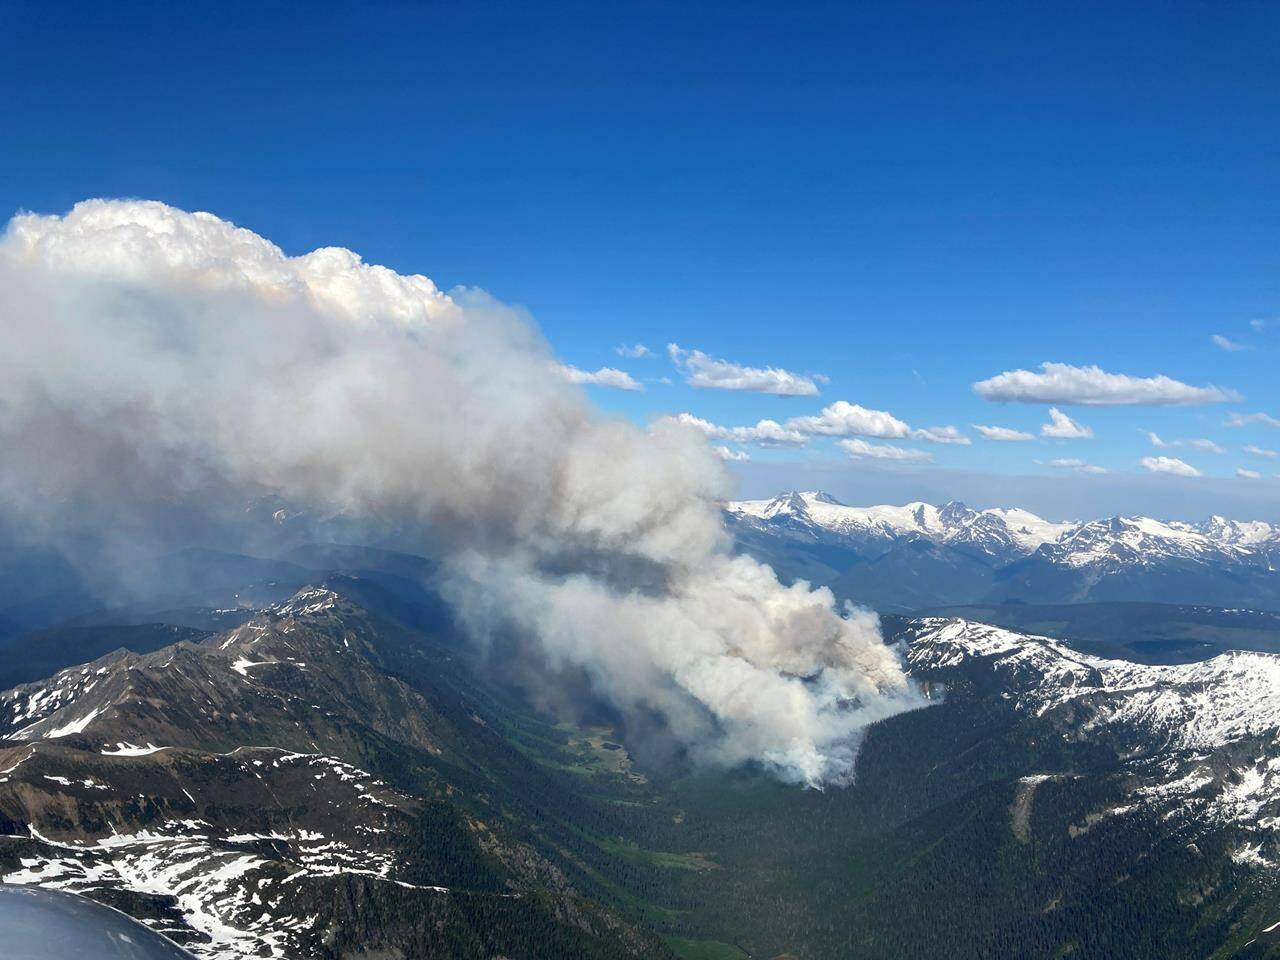 The BC Wildfire Service is responding to the Chapel Creek wildfire located approximately 30 kilometres north of Blue River and 10 kilometres west of Highway 5 as shown in this handout image provided by the BC Wildfire Service. THE CANADIAN PRESS/HO-BC Wildfire Service